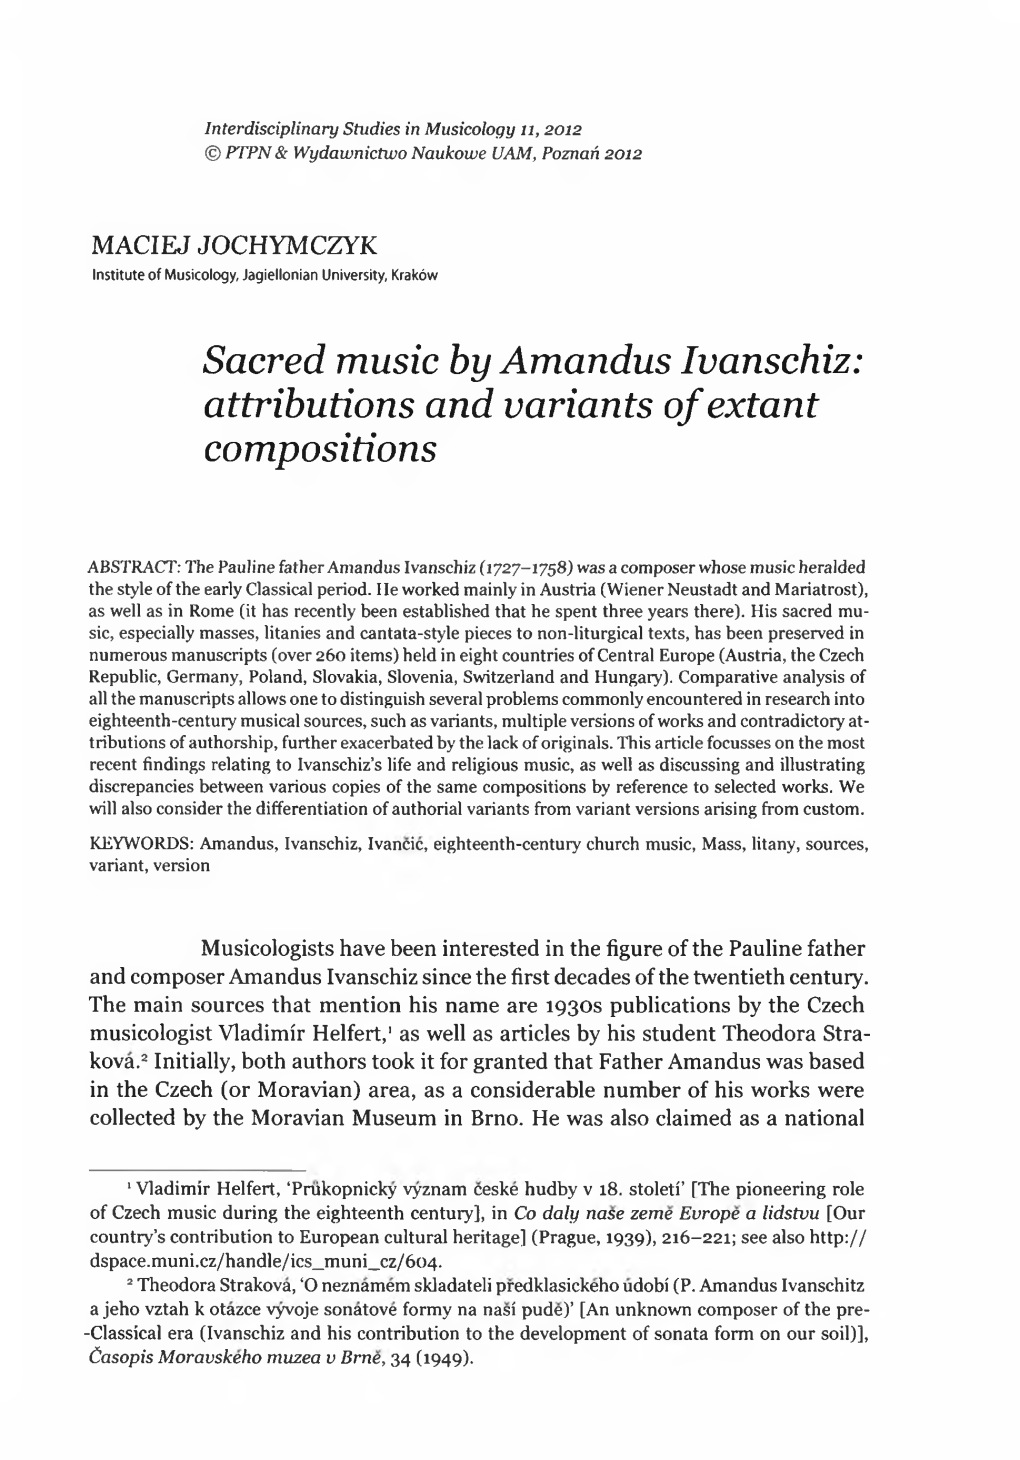 Sacred Music by Amandus Ivanschiz: Attributions and Variants of Extant Compositions